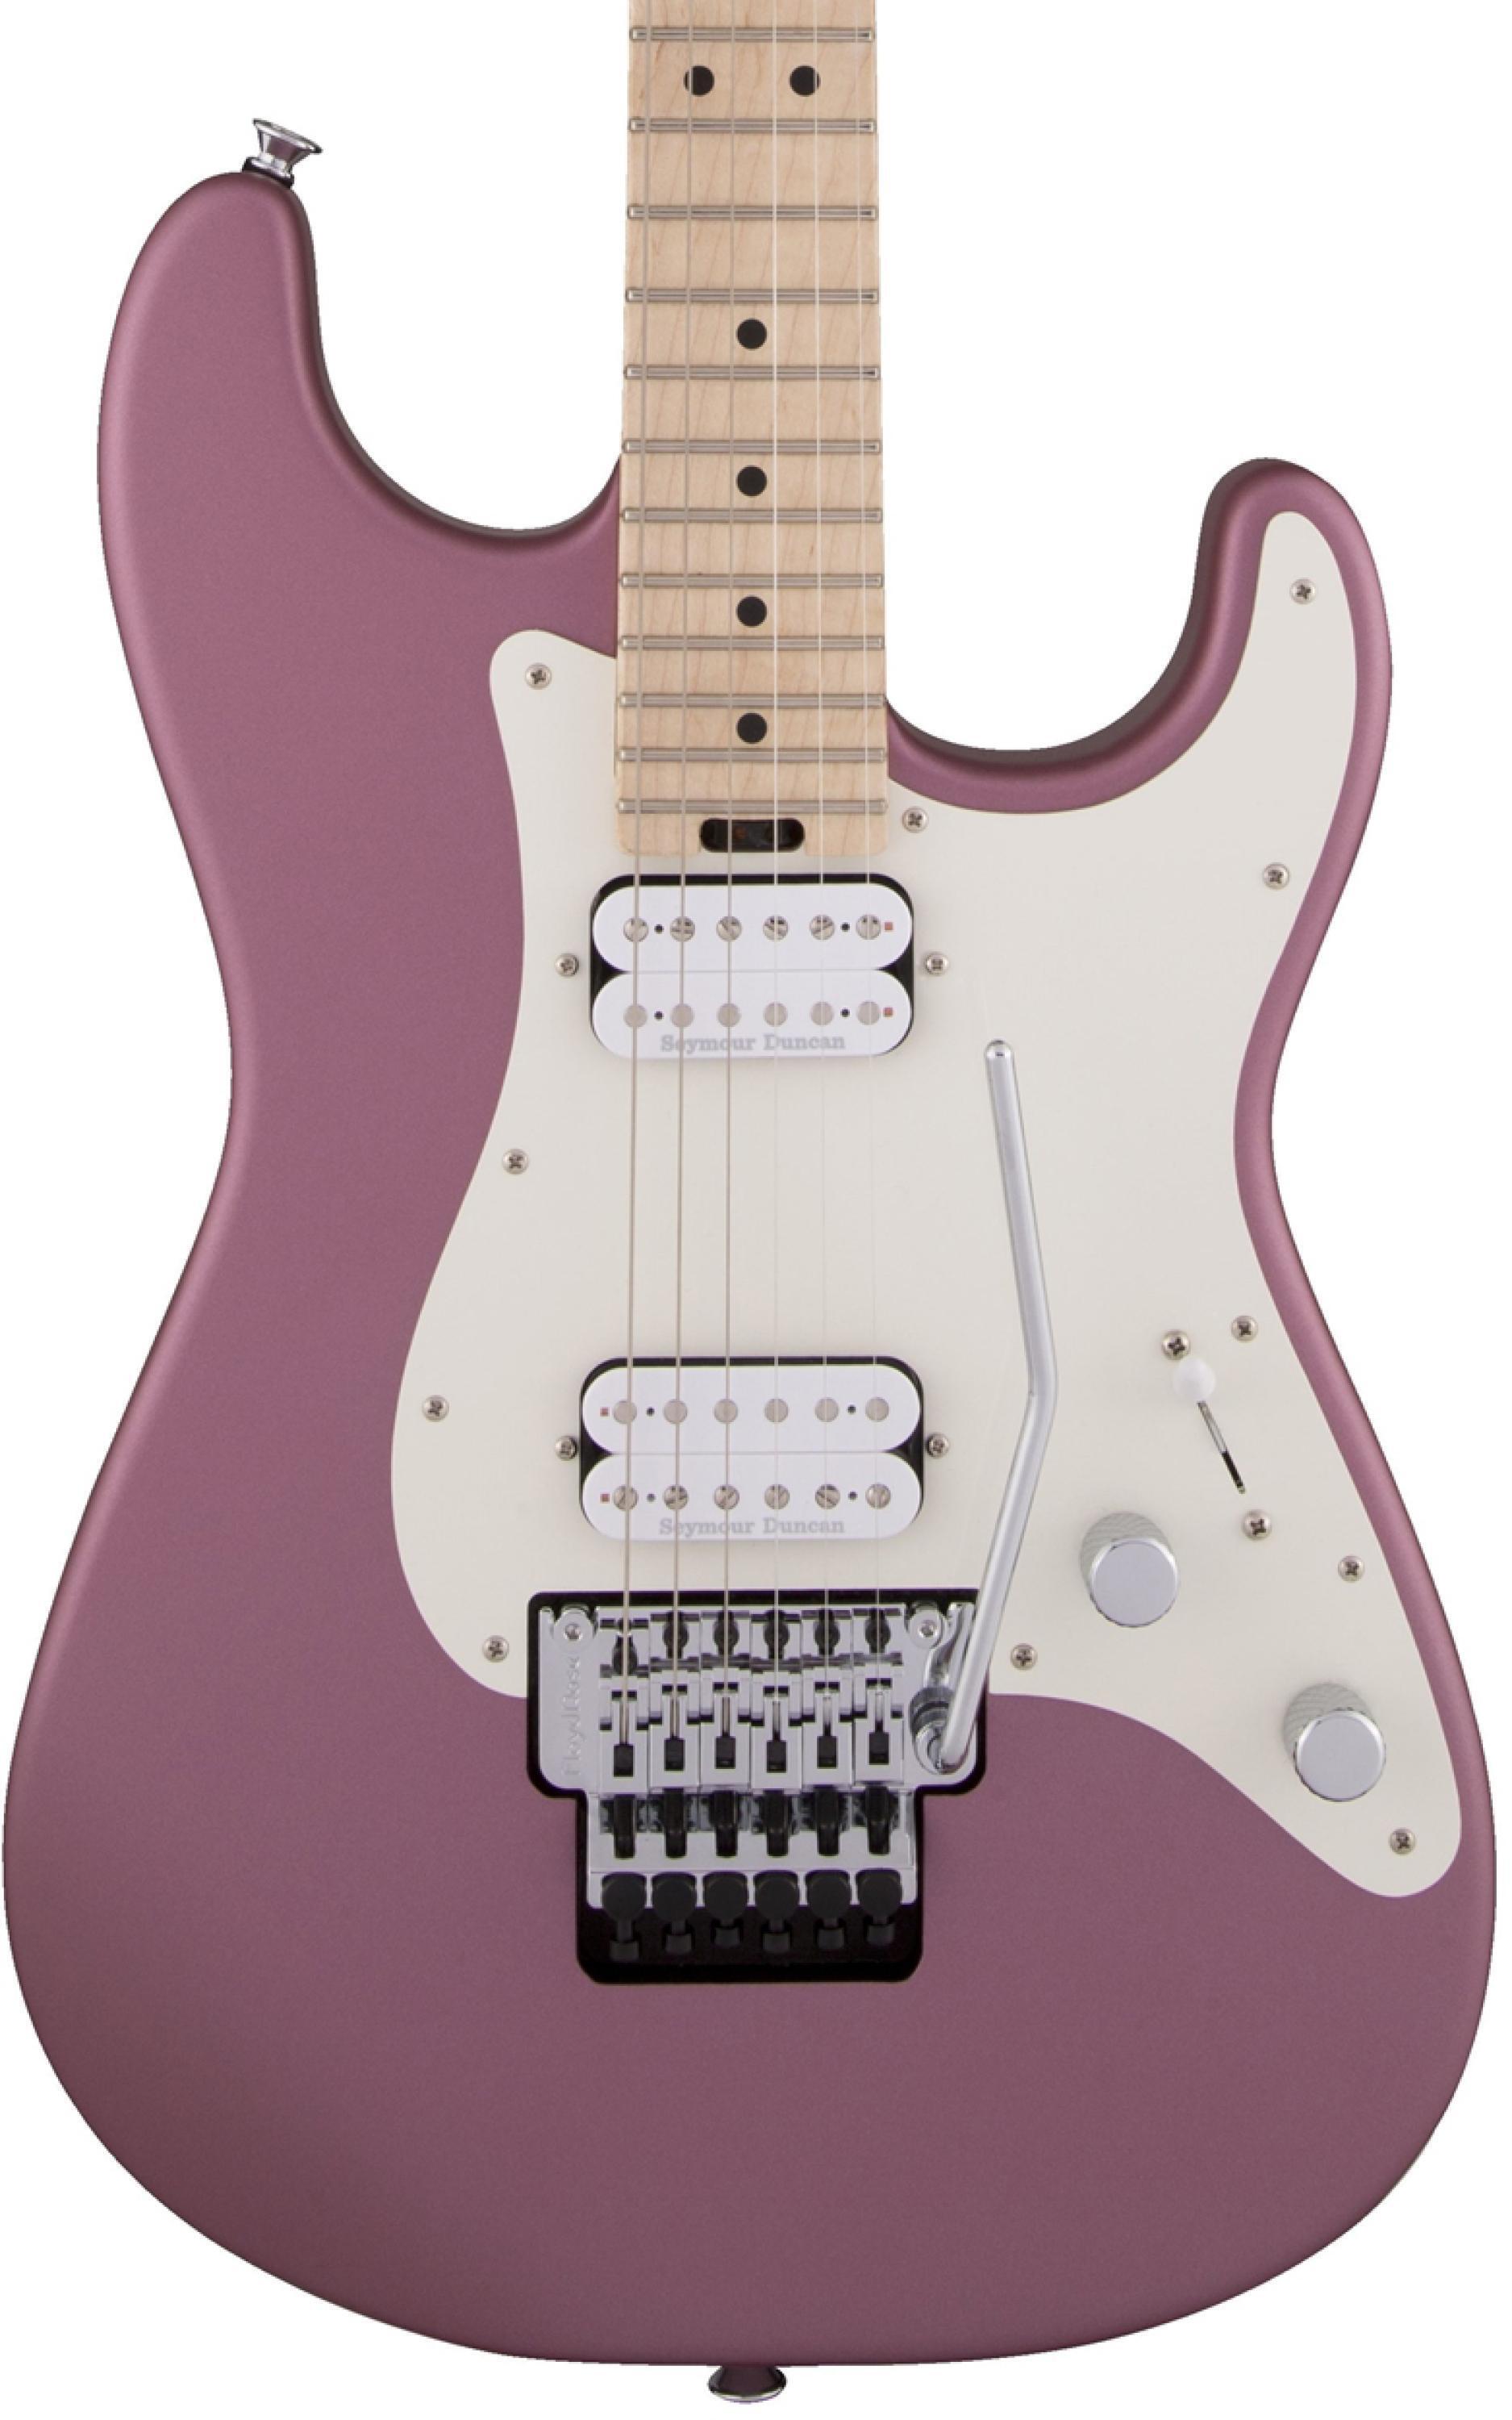 Burgundy - Satin Mist HH FR Style | M Pro-Mod So-Cal Charvel Sweetwater 1